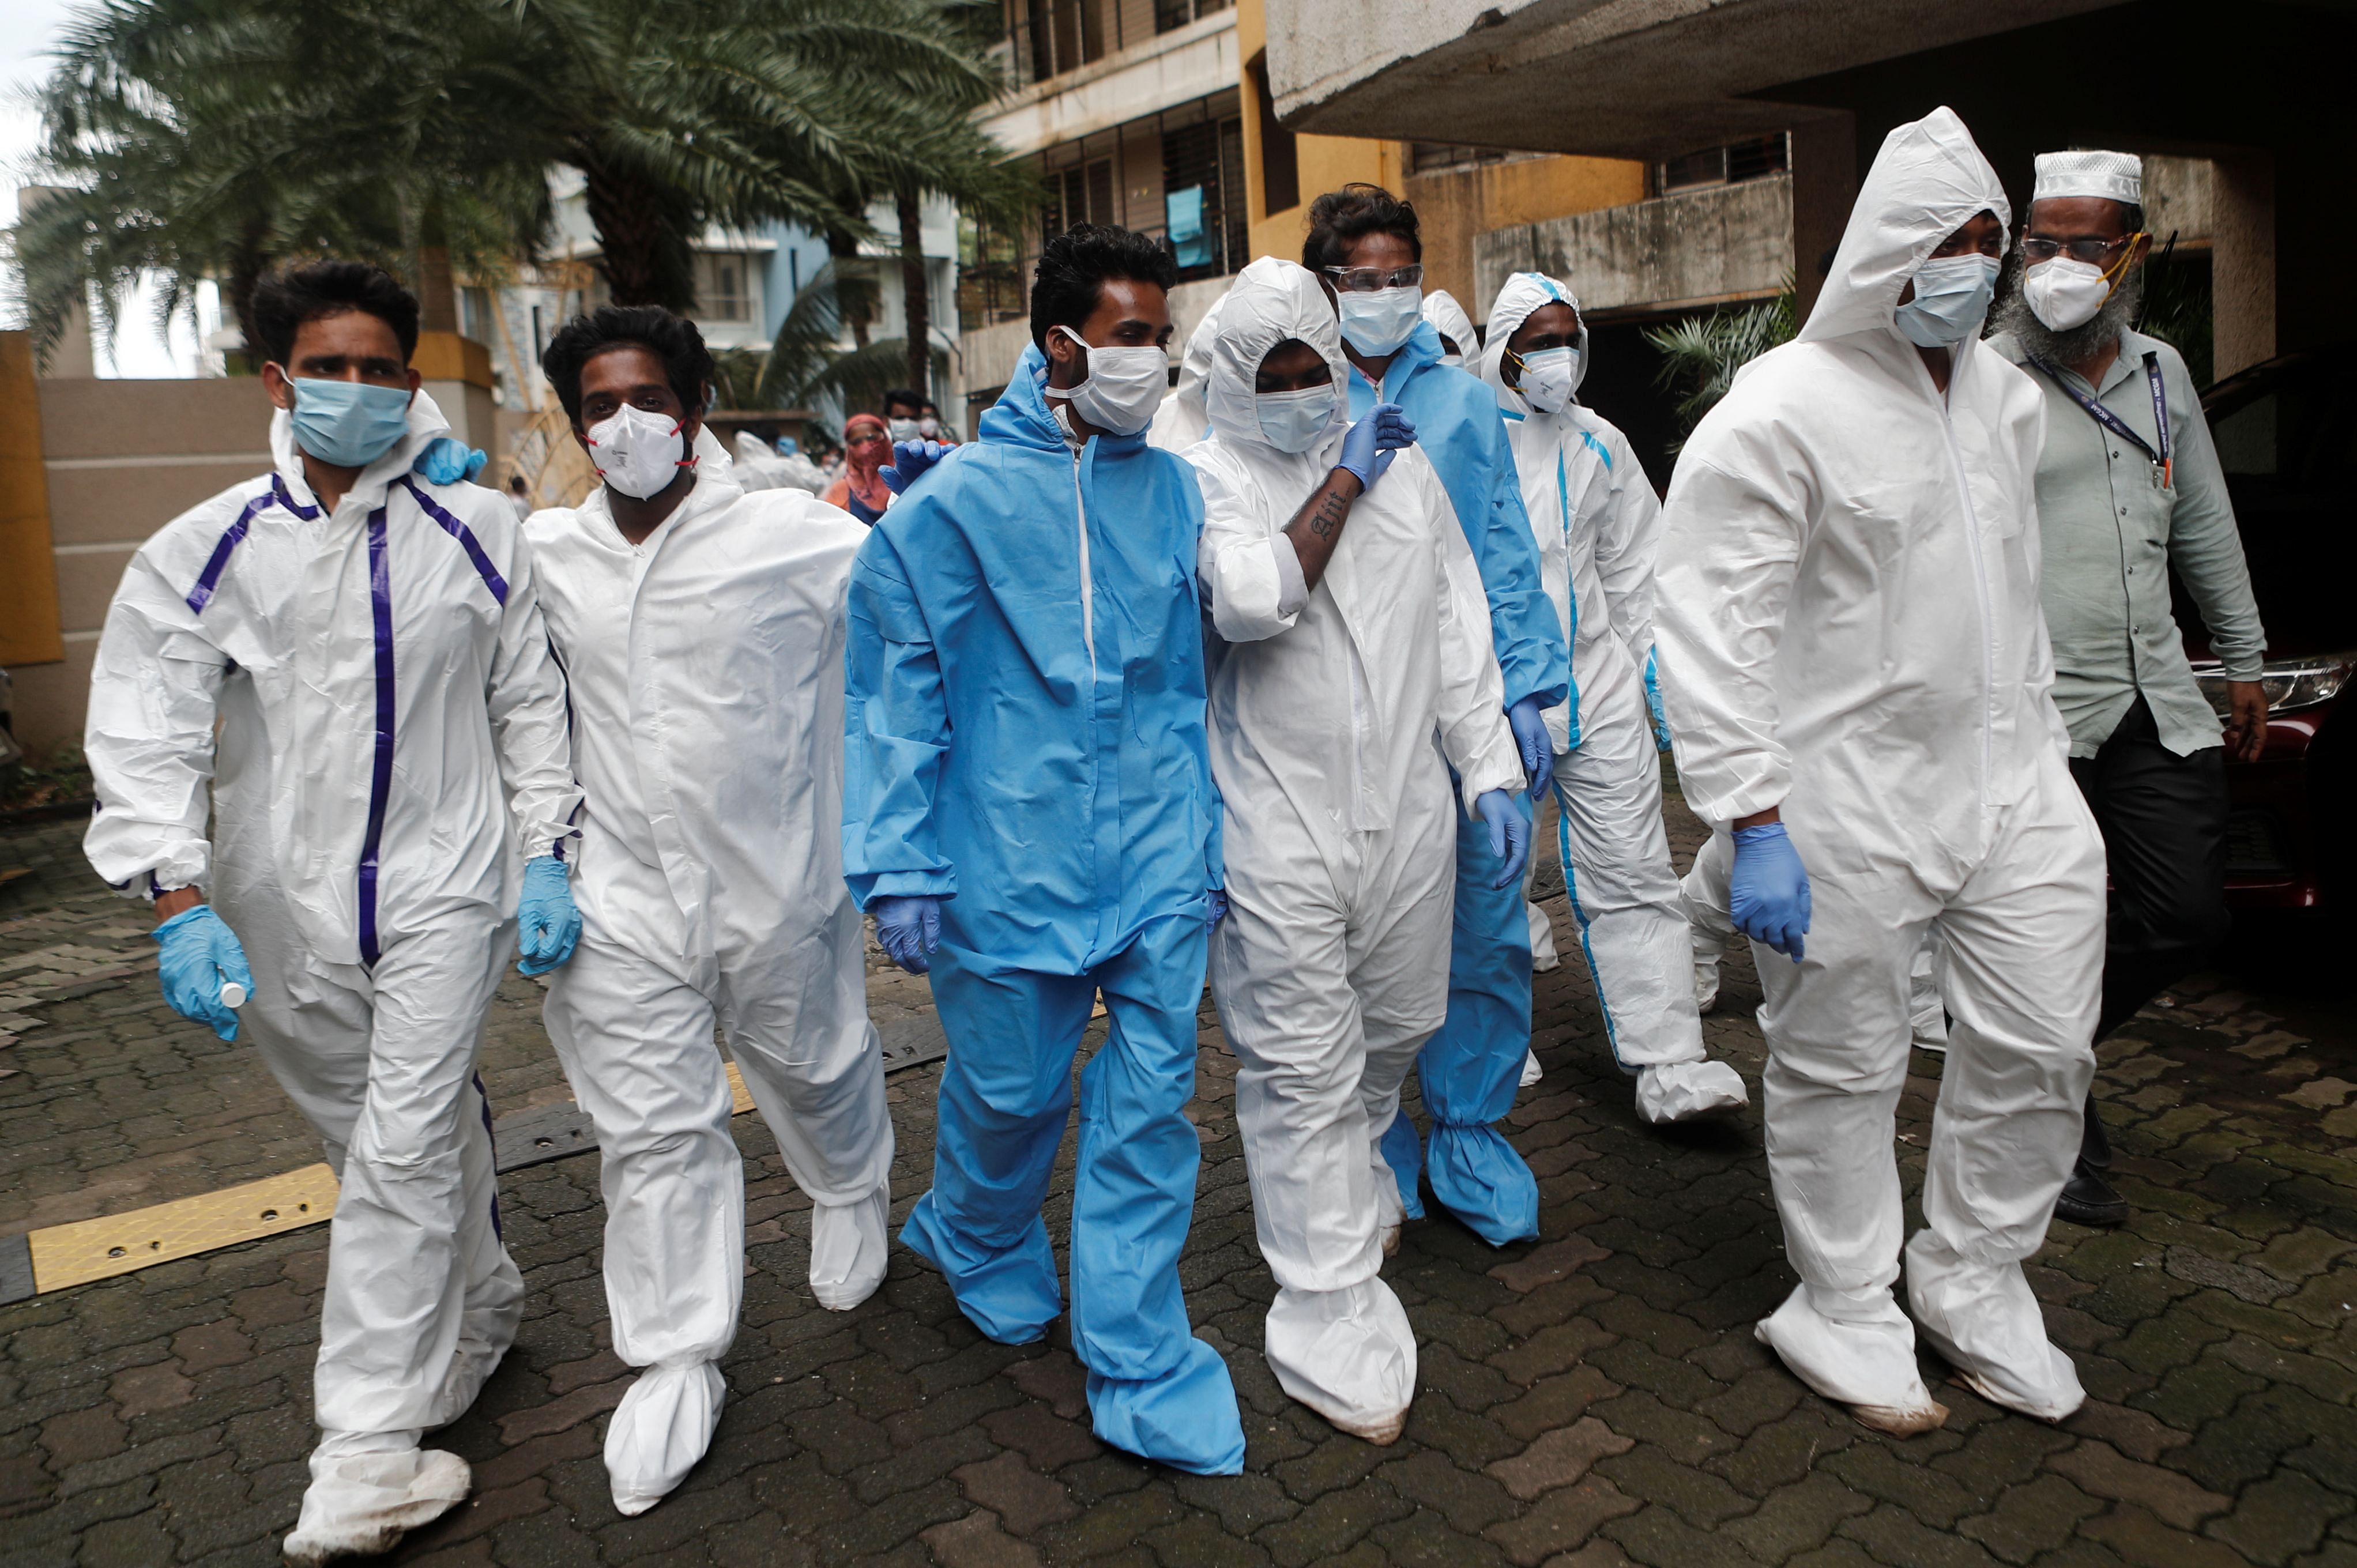 Health workers in personal protective equipment (PPE) enter a residential building complex during a check up campaign for the coronavirus disease (COVID-19) in Mumbai. Credit: Reuters